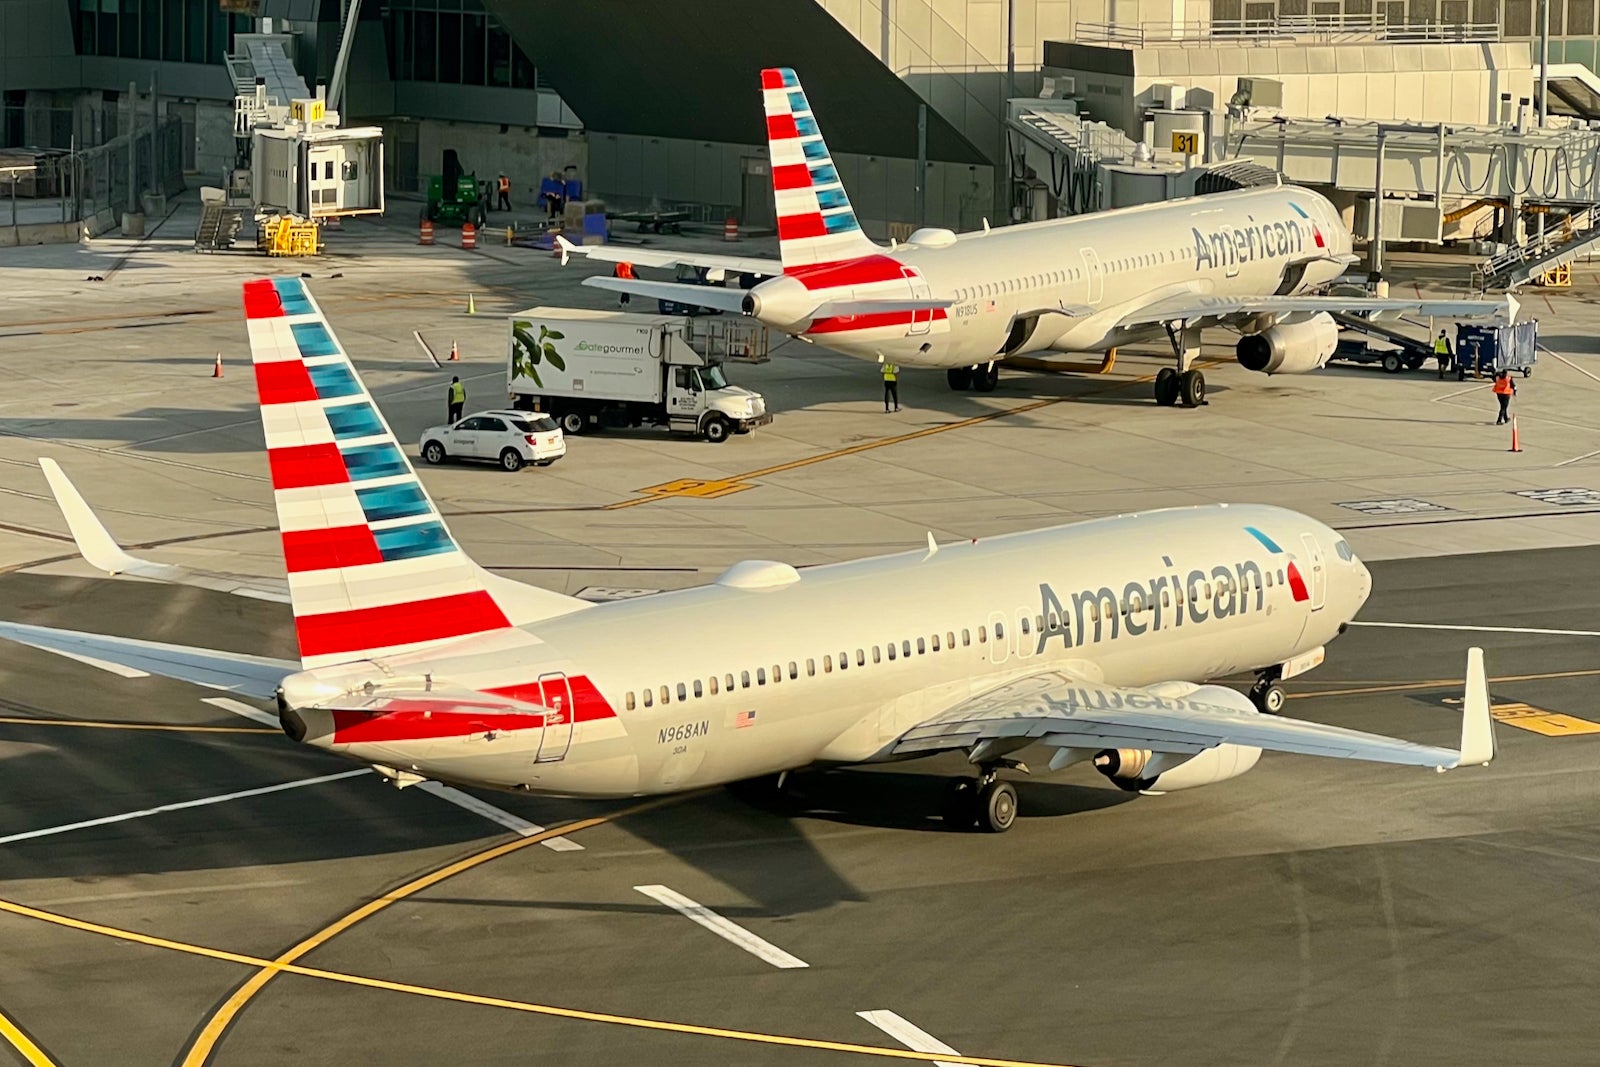 Two American Airlines jets